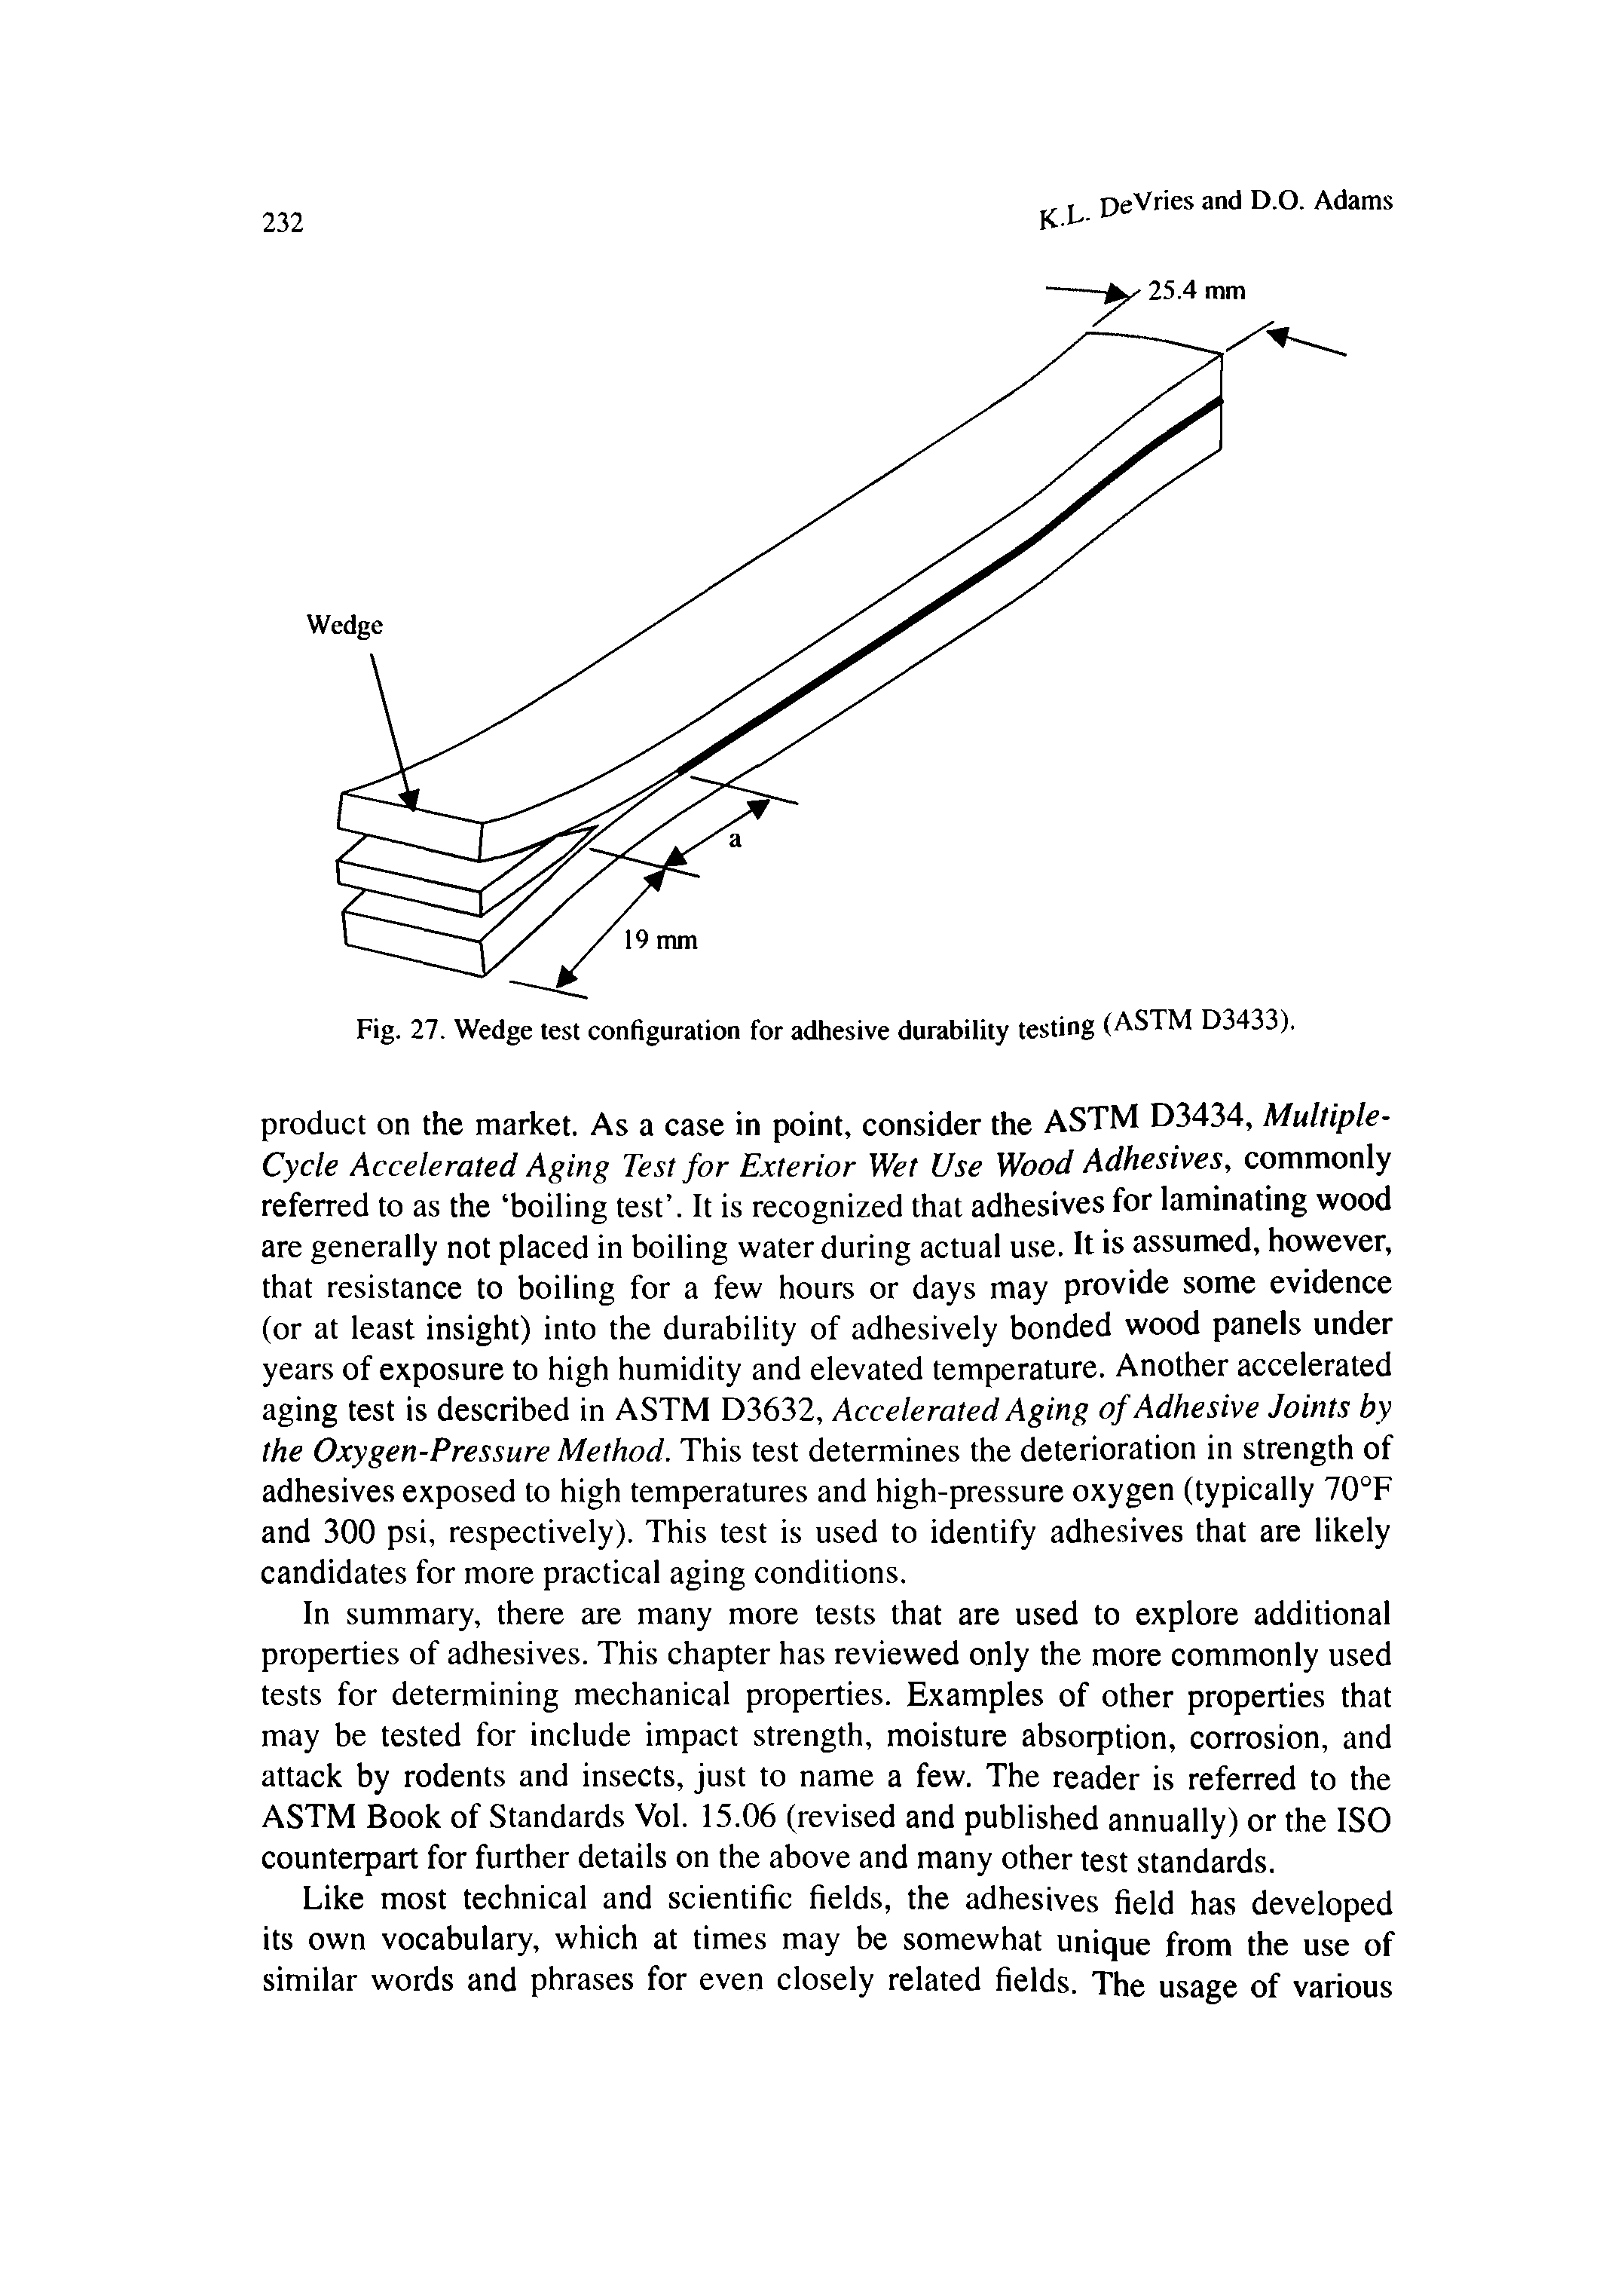 Fig. 27. Wedge test configuration for adhesive durability testing (ASTM D3433).